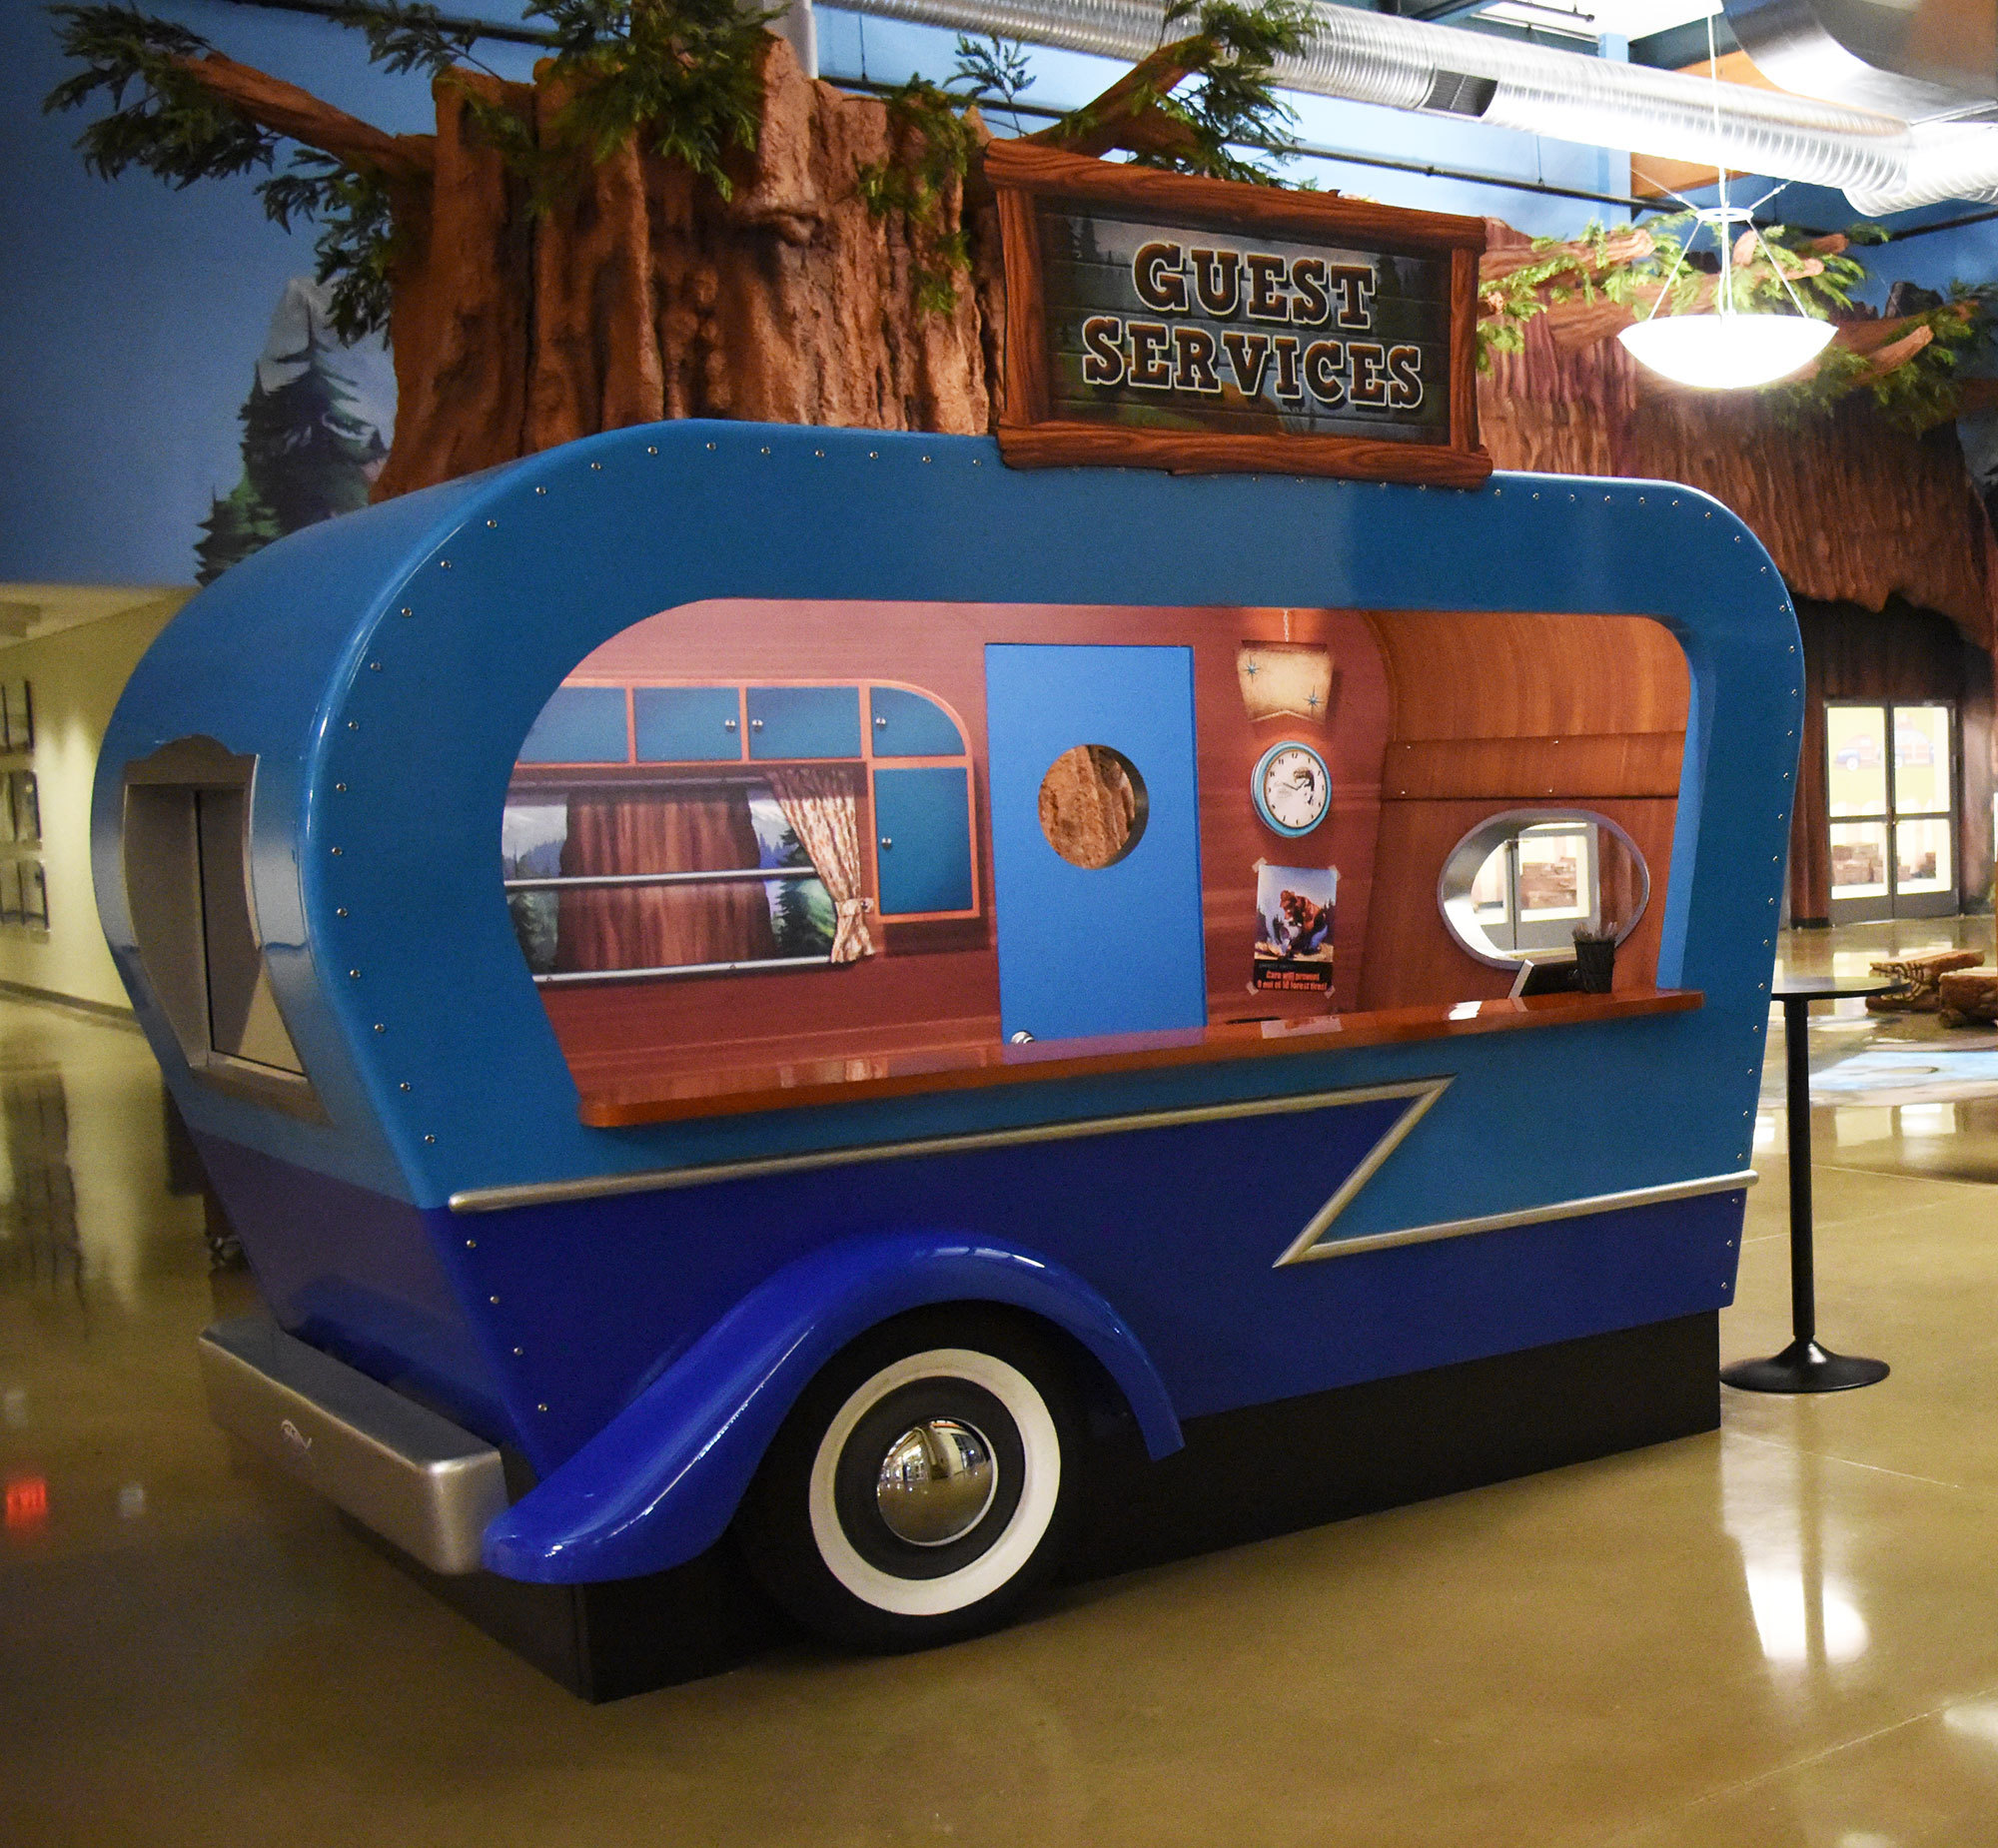 Blue/Wood 3D crafted vintage style Travel Trailer check in desk in a Camping Themed space.